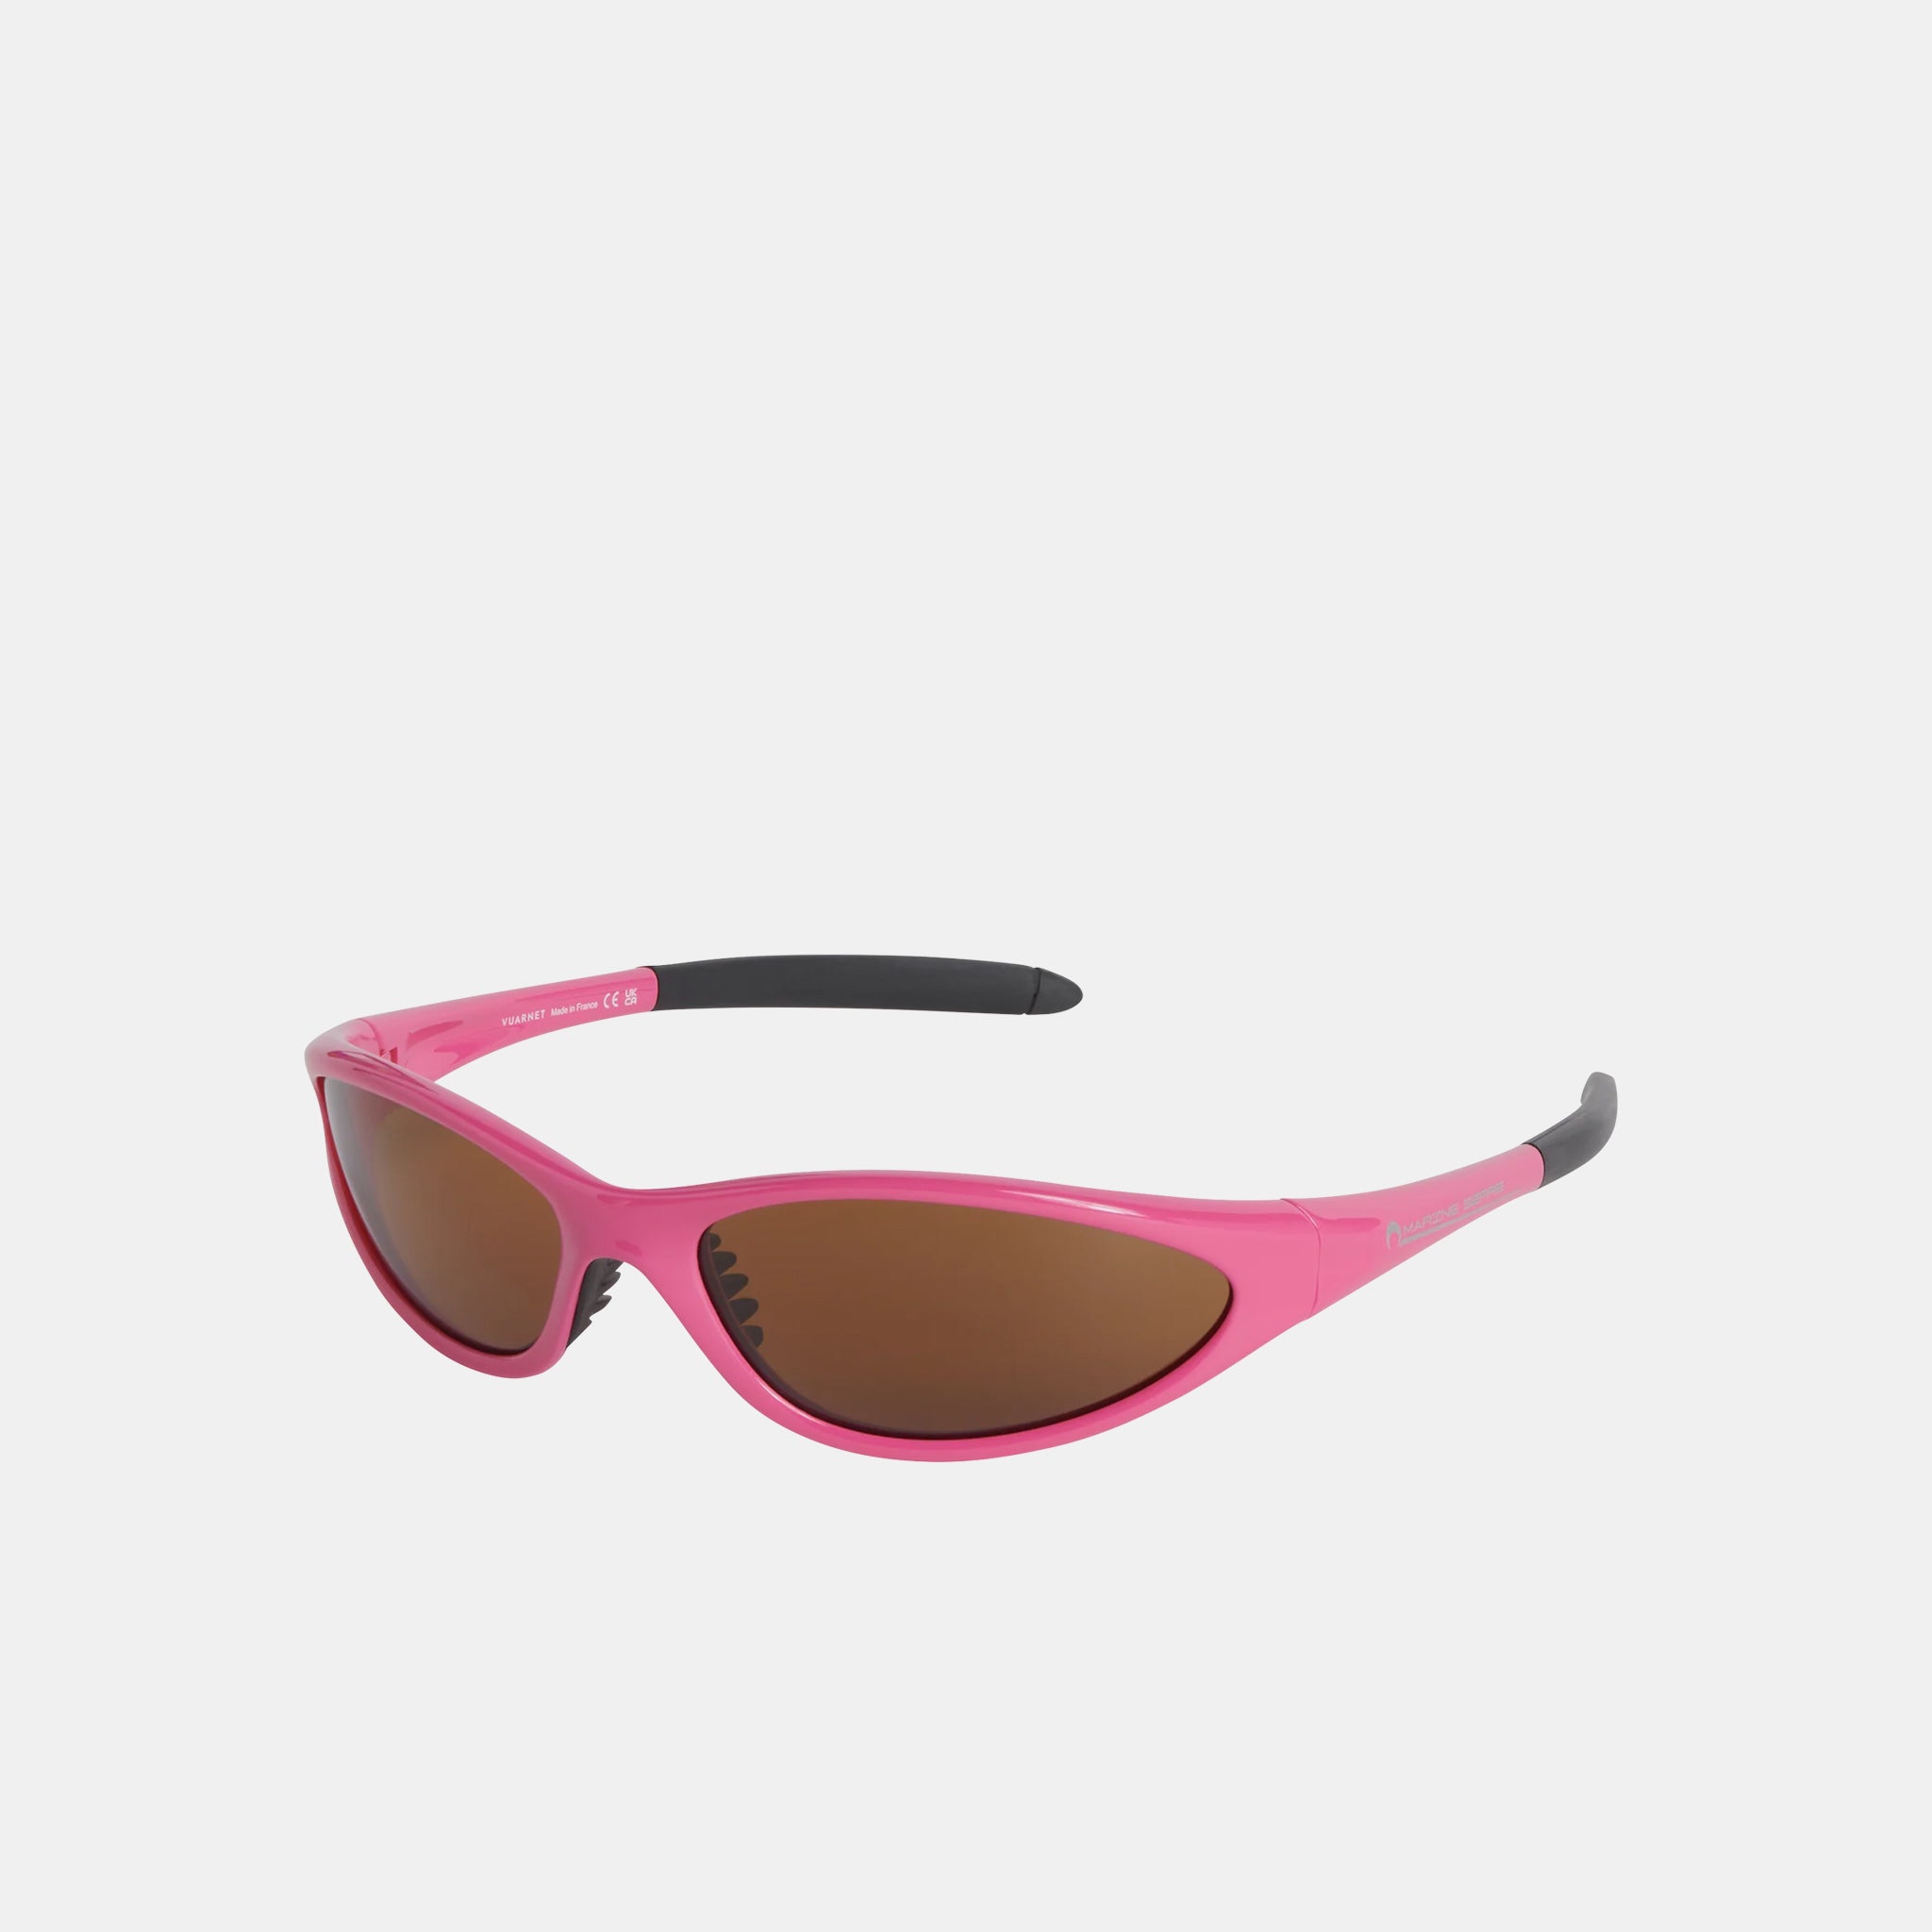 Flat photo of the MS x Vaurnet Injected Visionizer Glasses - Pink.